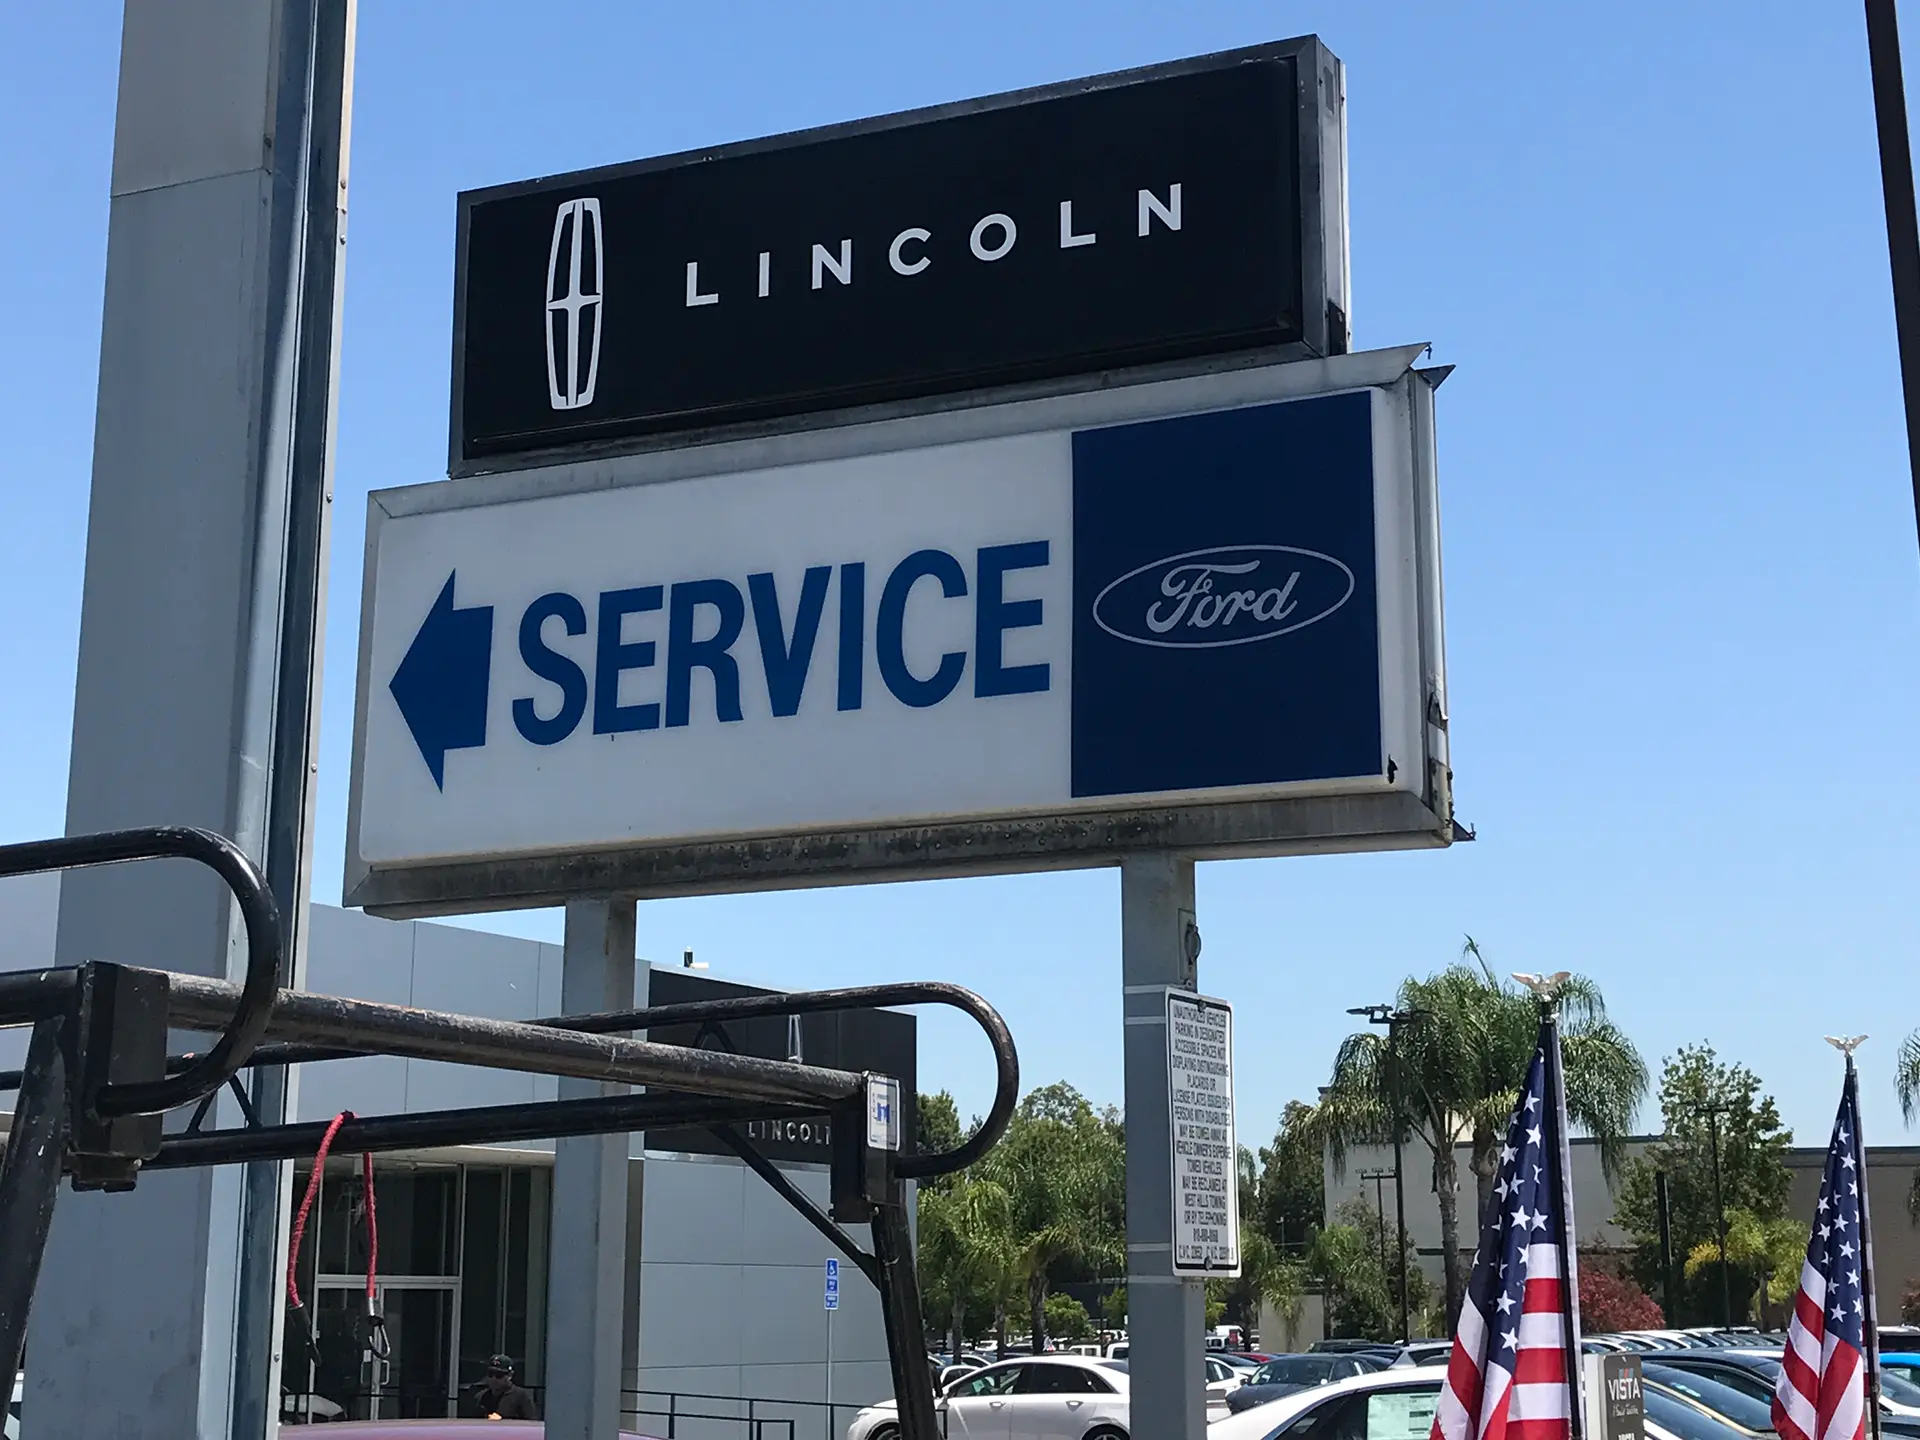 A Ford car dealership featuring a channel letter sign.